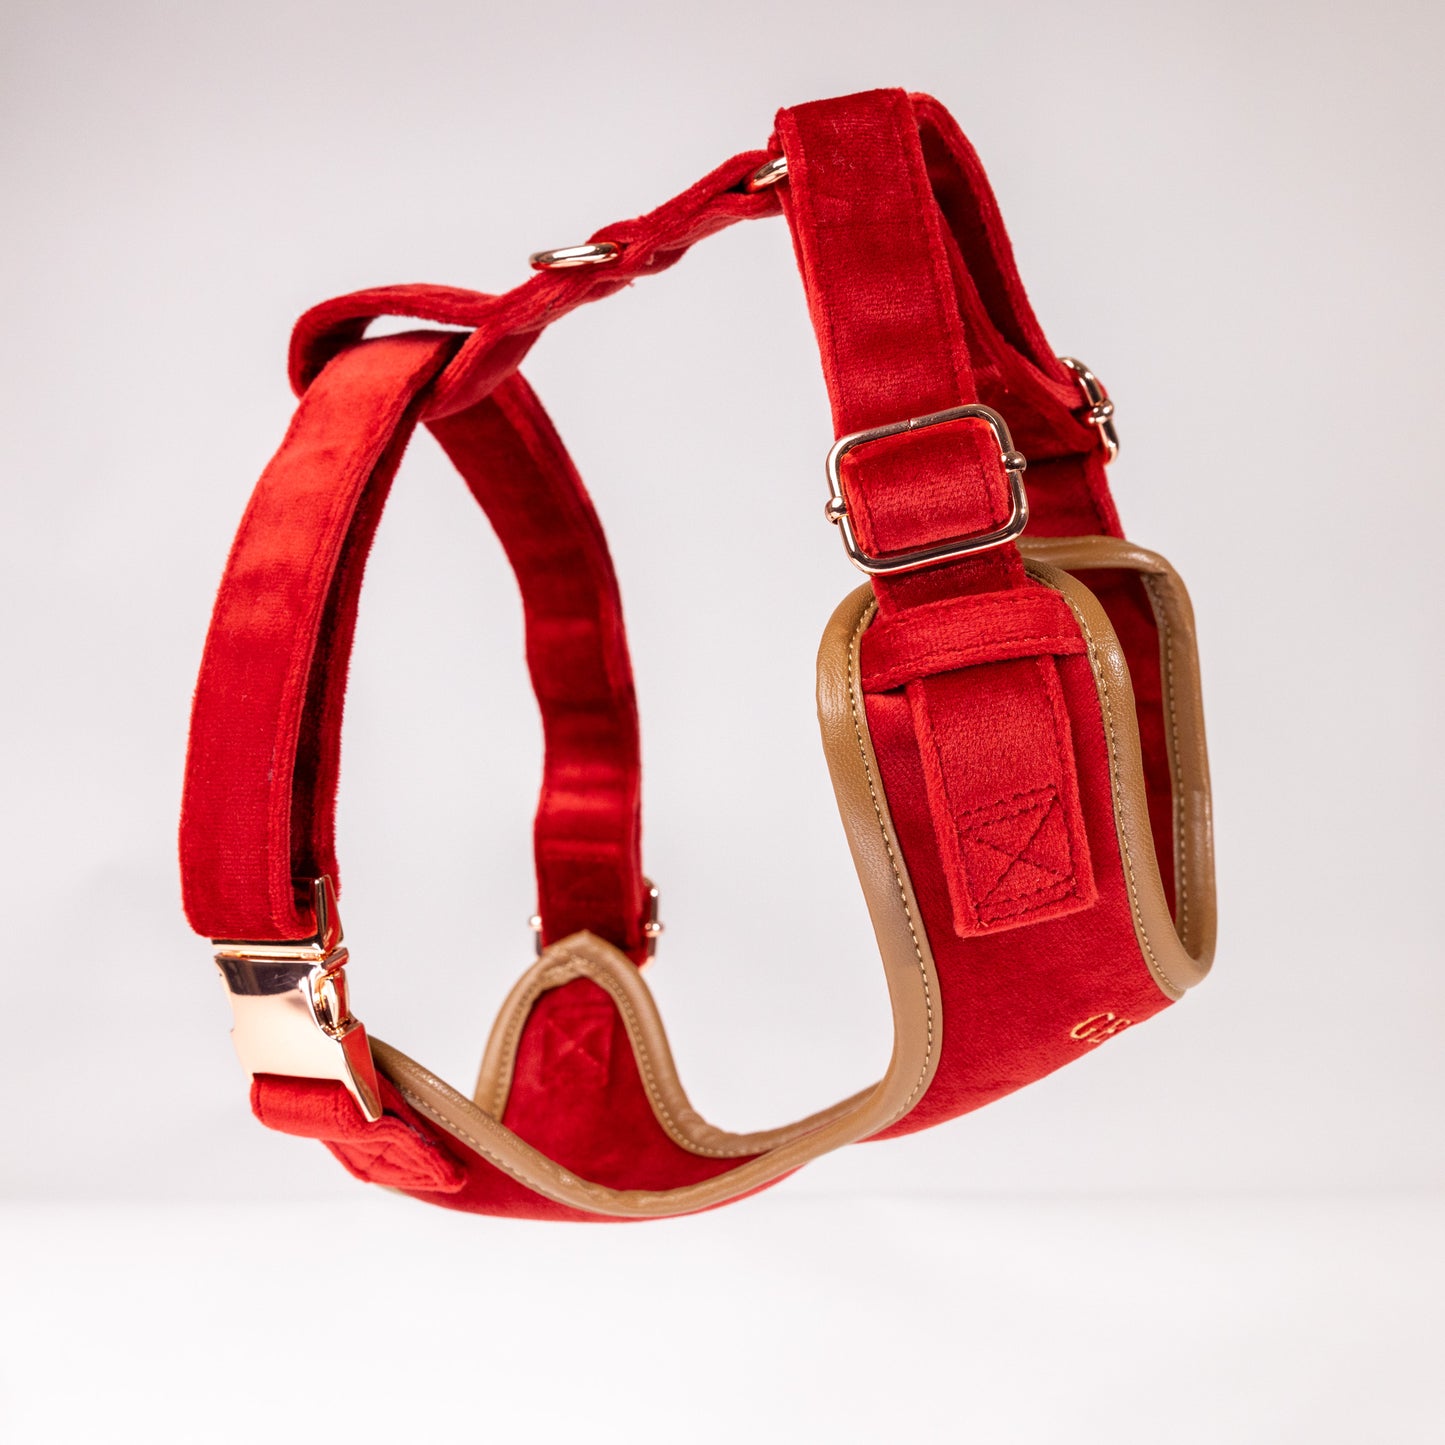 Sadie Velvet Red Luxury Harness with Brown Leather Trim